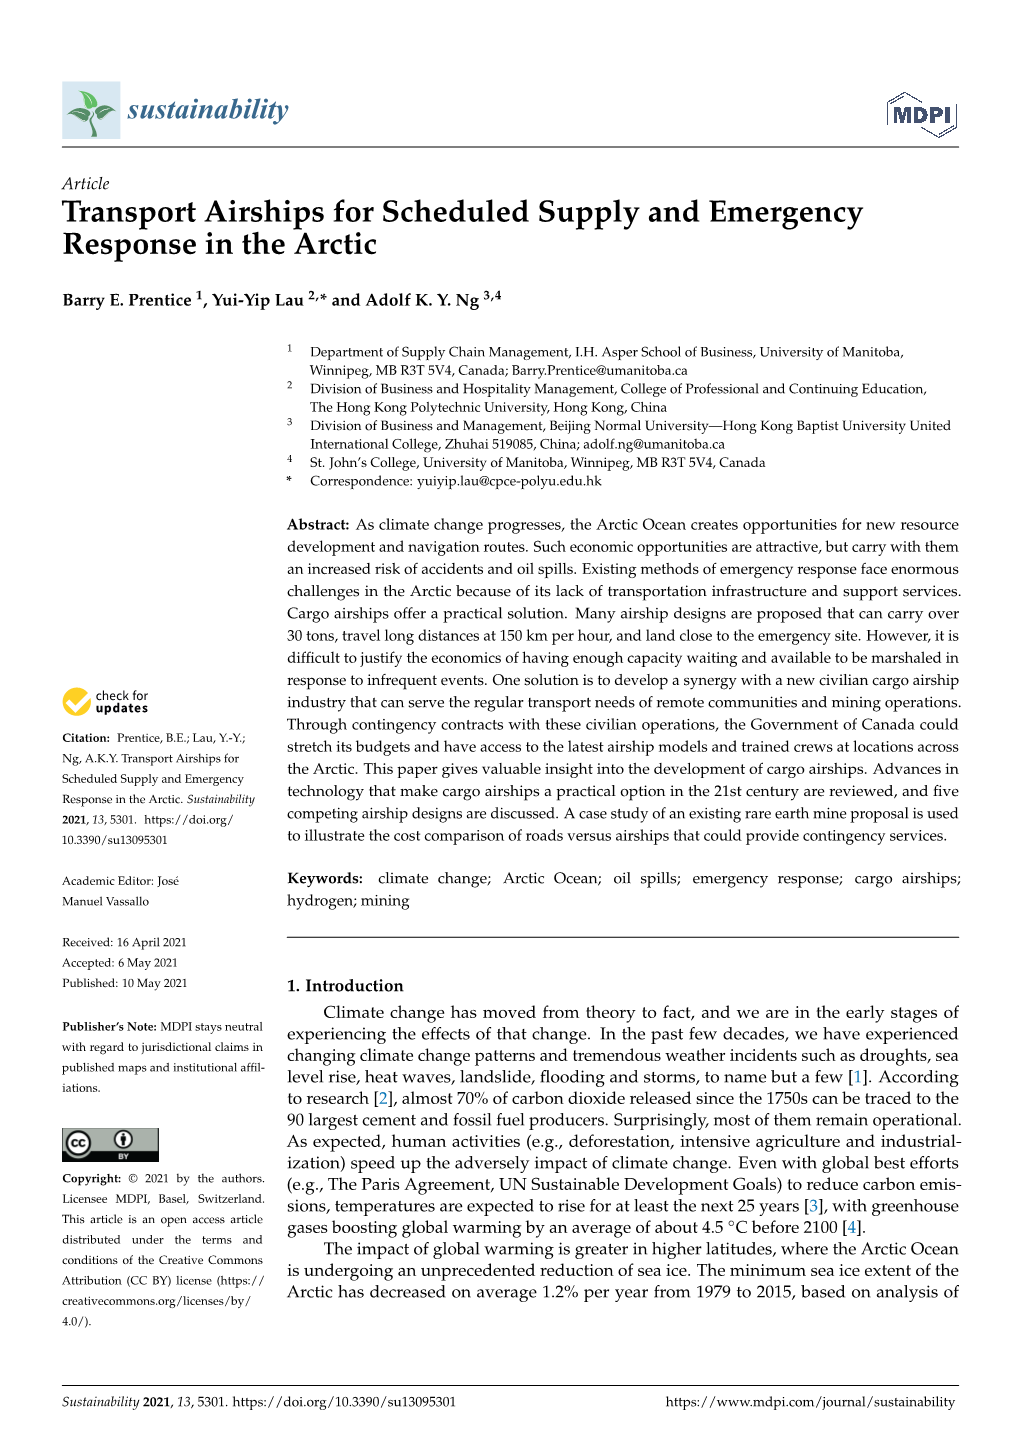 Transport Airships for Scheduled Supply and Emergency Response in the Arctic